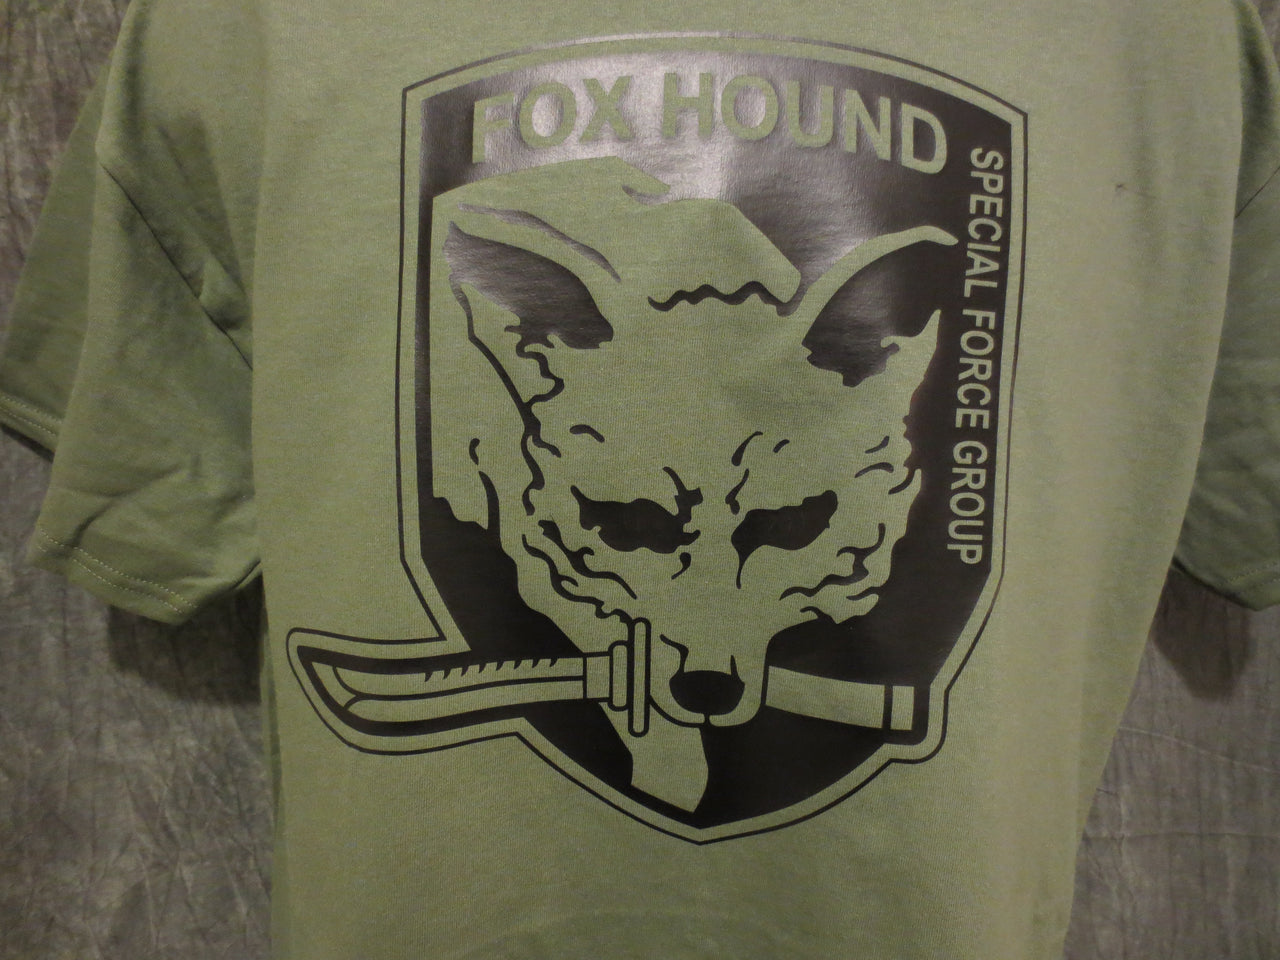 Metal Gear Solid Fox Hound Special Force Group Tshirt: Military Army O.D. Green With Black  Print - TshirtNow.net - 4